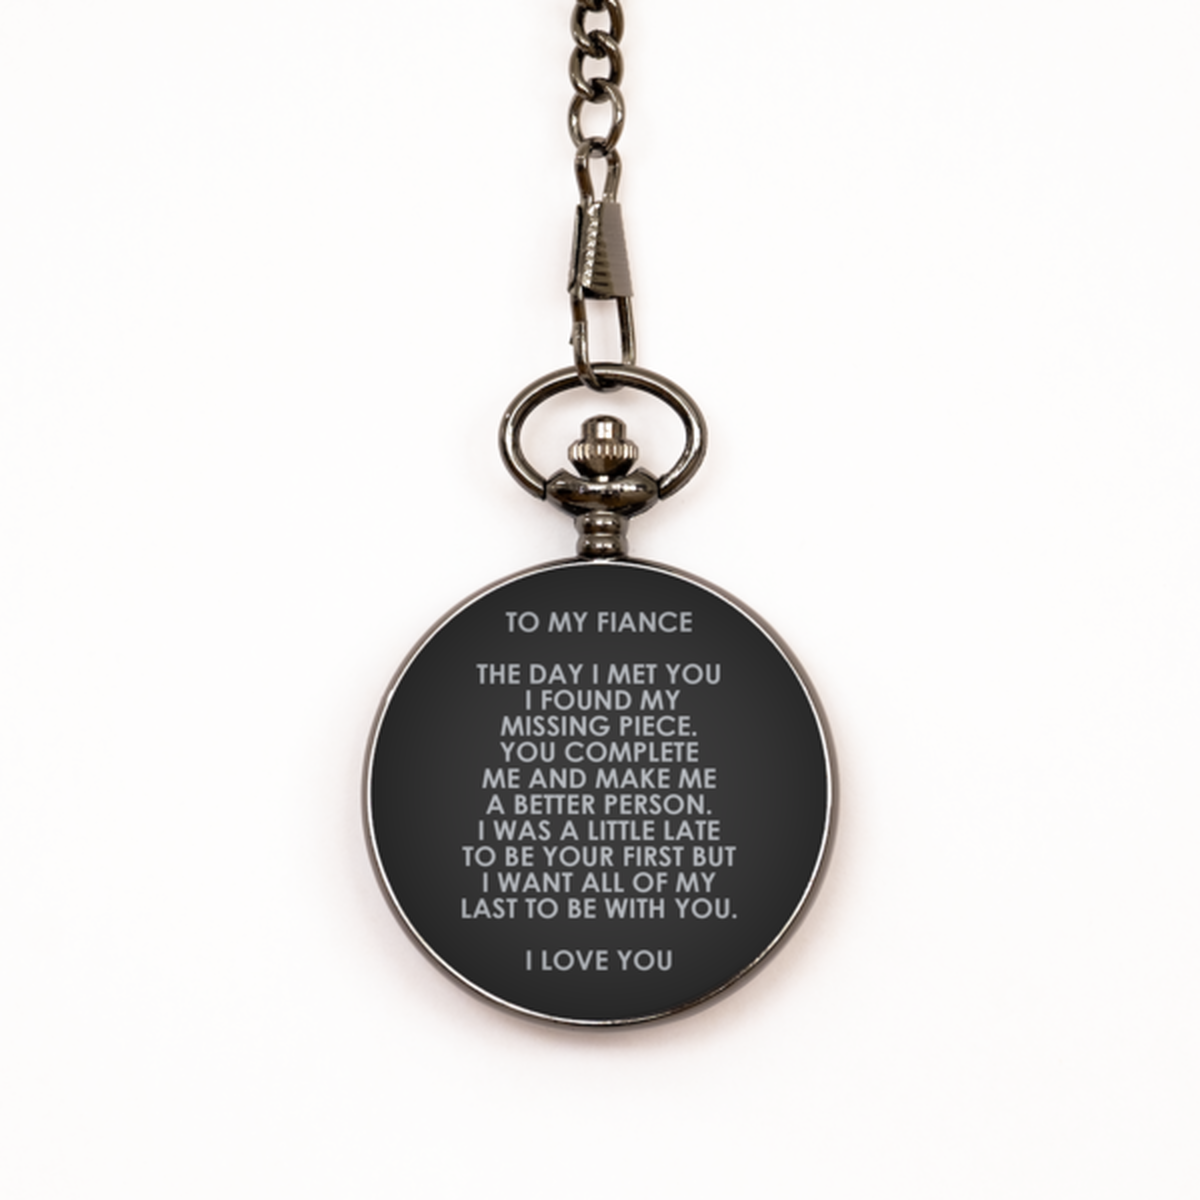 To My Fiance Black Pocket Watch, I Found My Missing Piece, Valentines  Gifts For Fiance From Fiancee, Birthday Gifts For Men